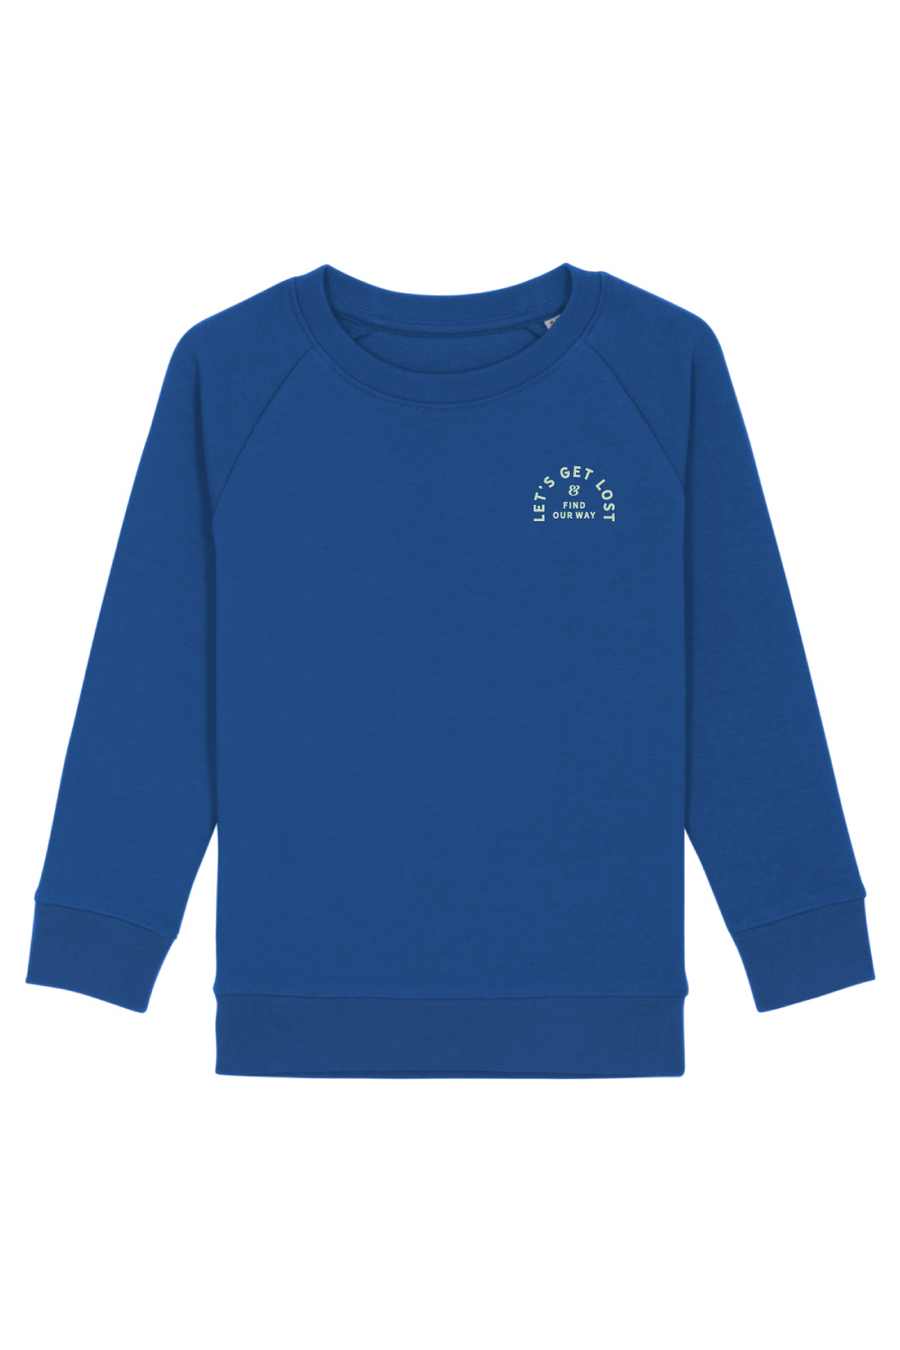 Let's get lost kids sweater - Joh Clothing